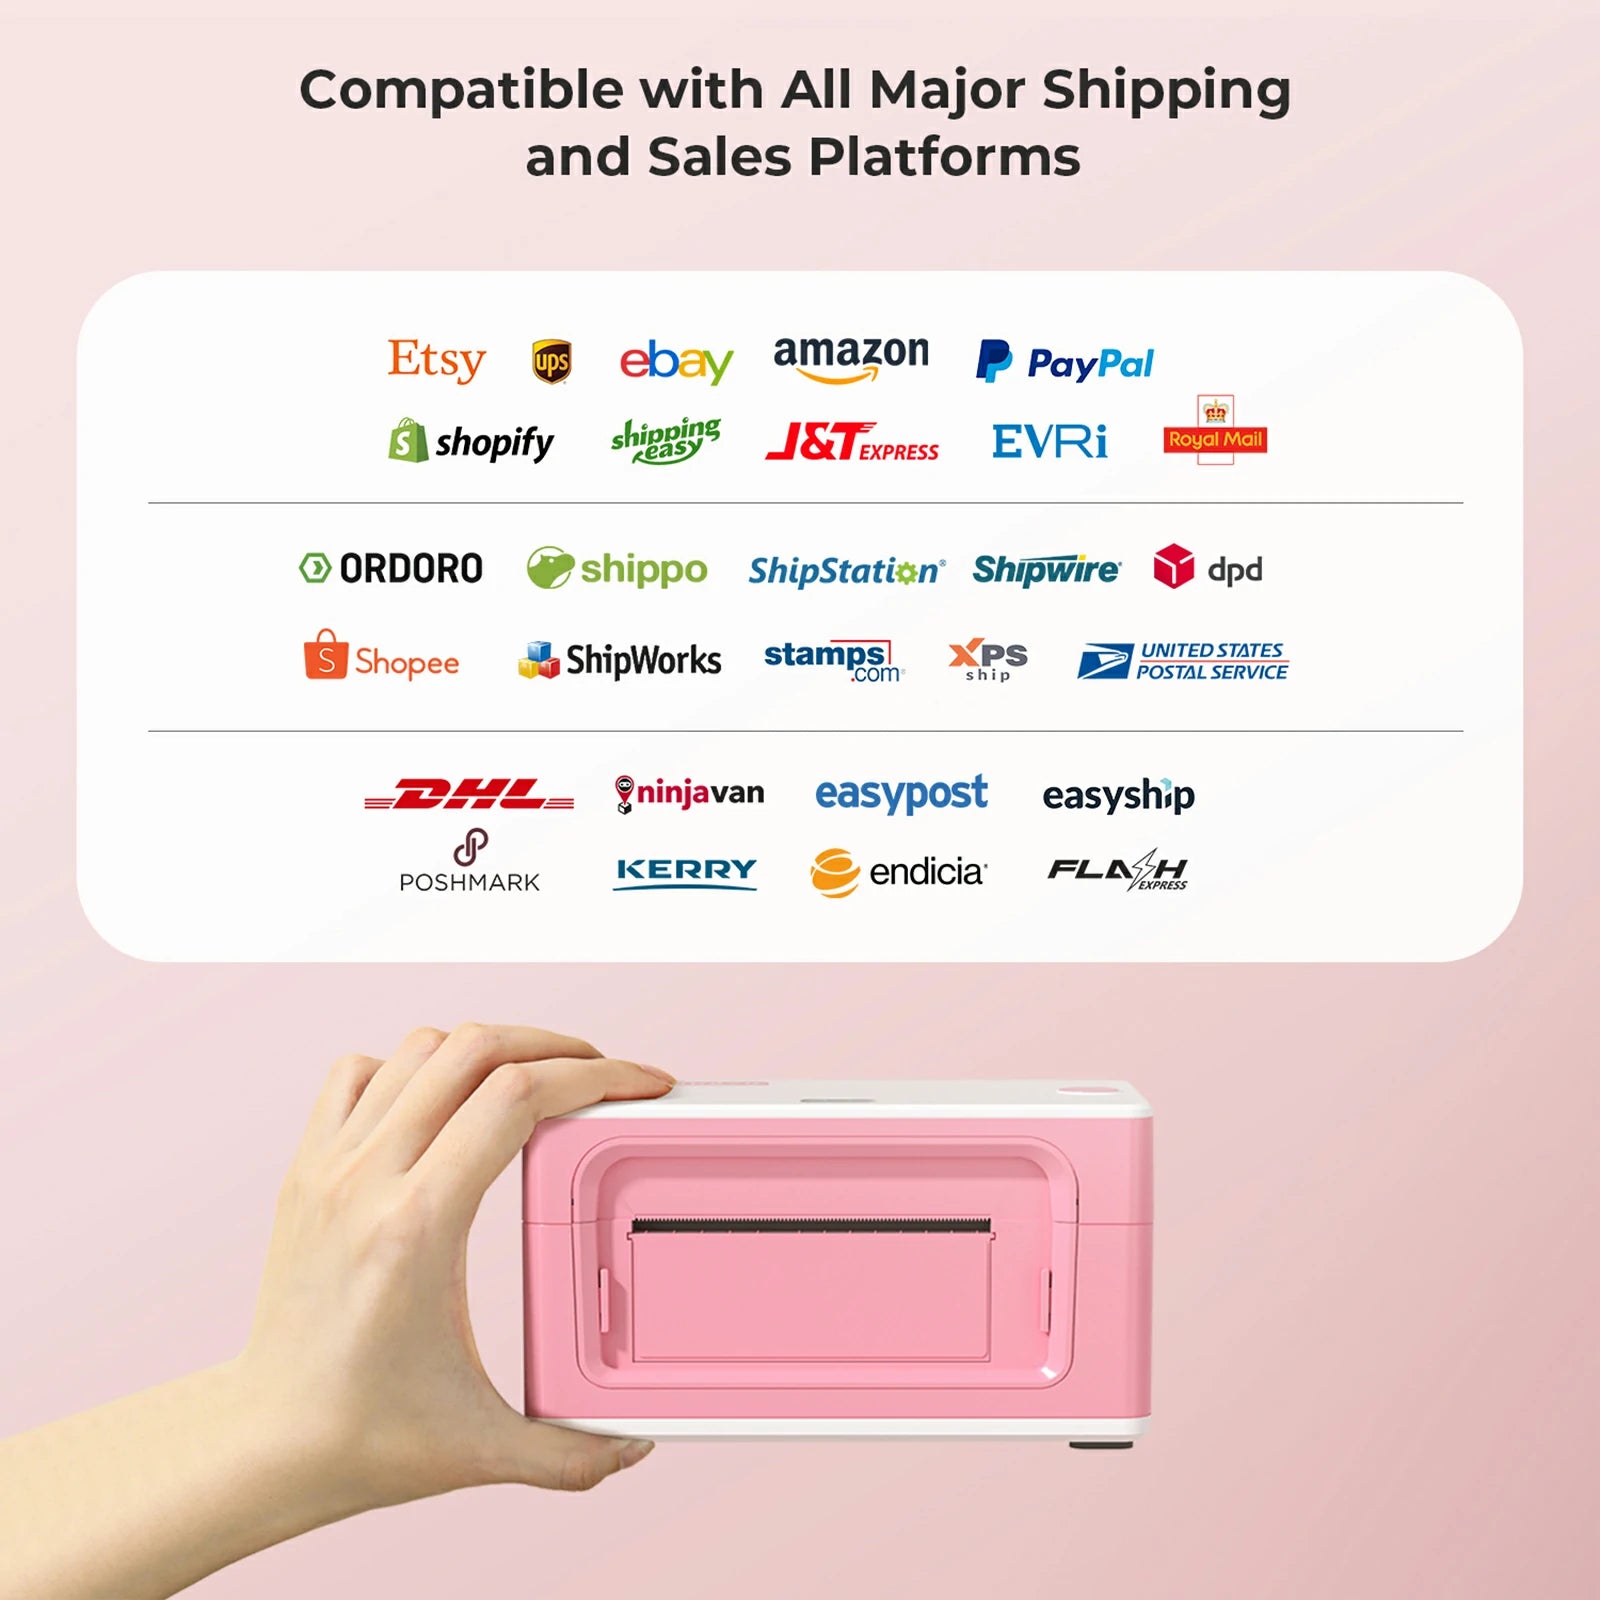 MUNBYN P941B Bluetooth thermal label printer is compatible with all major shipping and sales platforms, including Etsy, Ebay, Shopify, UPS and Fedex.